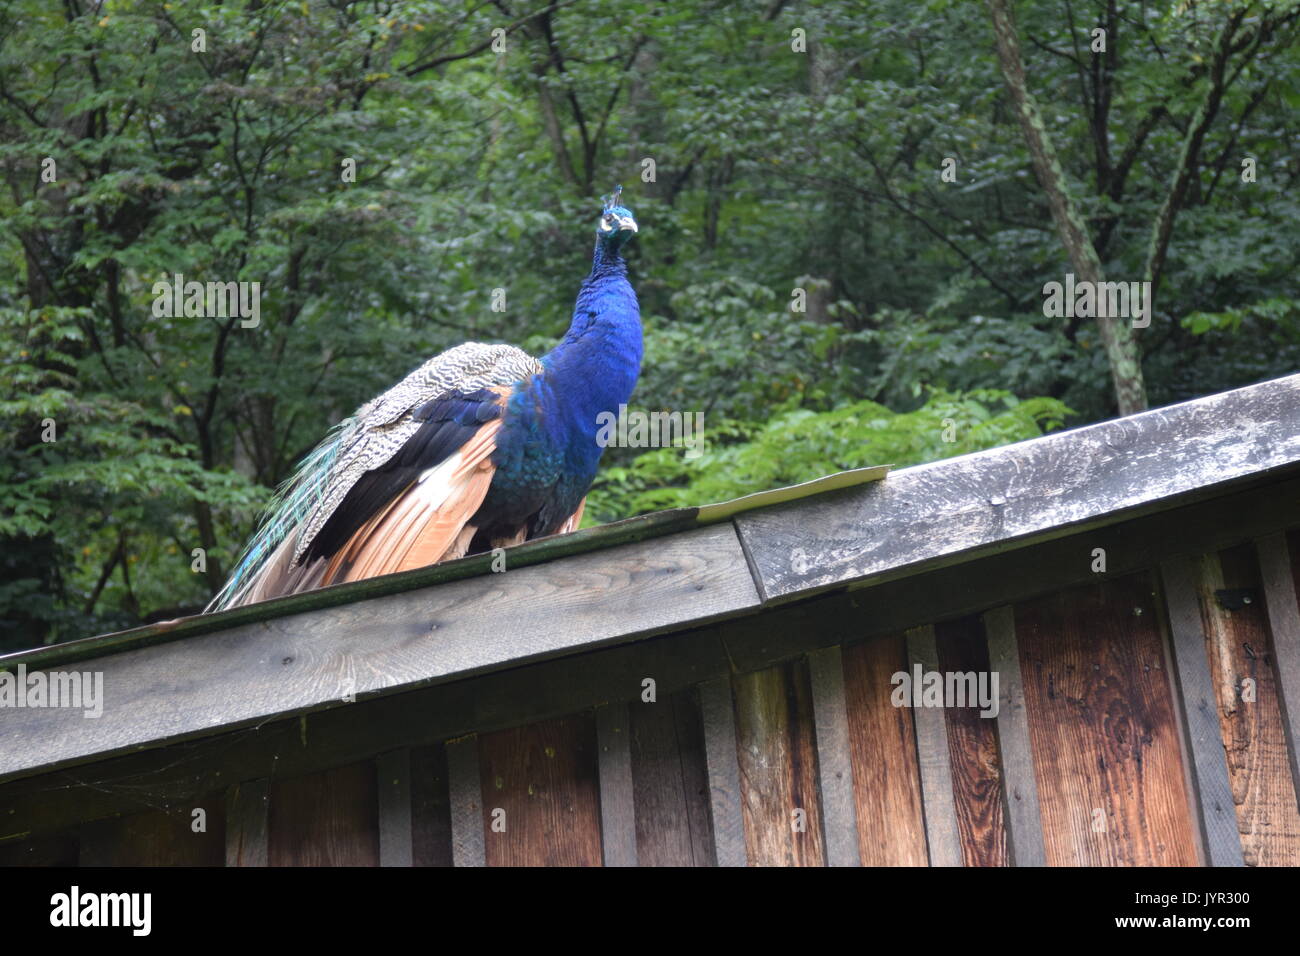 Blue peacock stands on slanted wooden roof of cabin Stock Photo